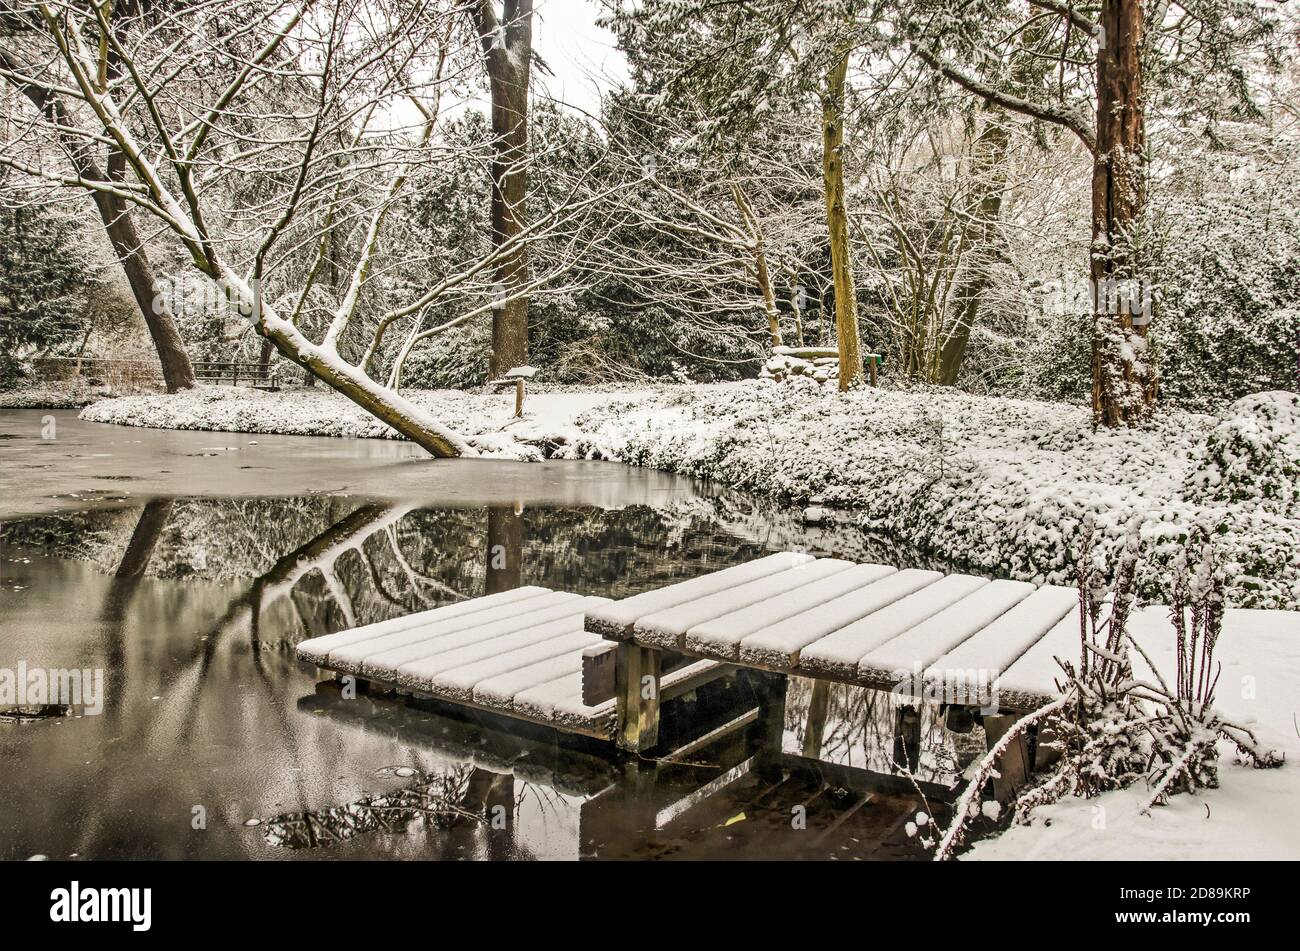 Rotterdam, The Netherlands, January 22, 2020: small jetty in a pond in Schoonoord park on a winter day after fresh snowfall Stock Photo